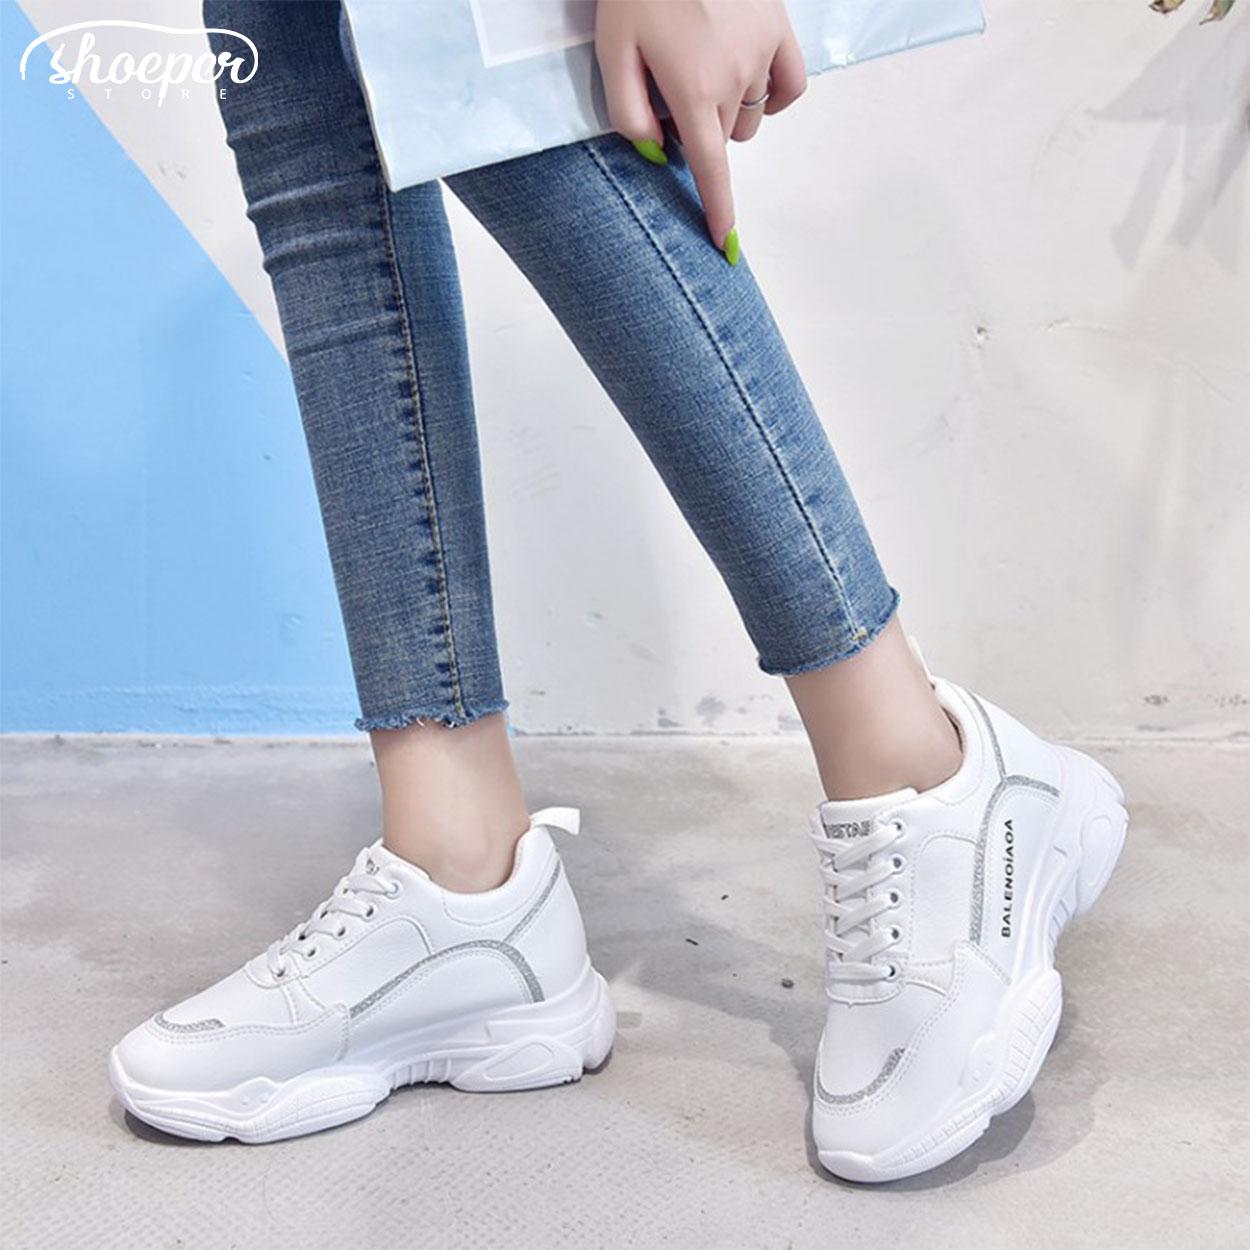 ShoePer Fancy (Korean Chunky Sneakers Shoes for Women) review and price